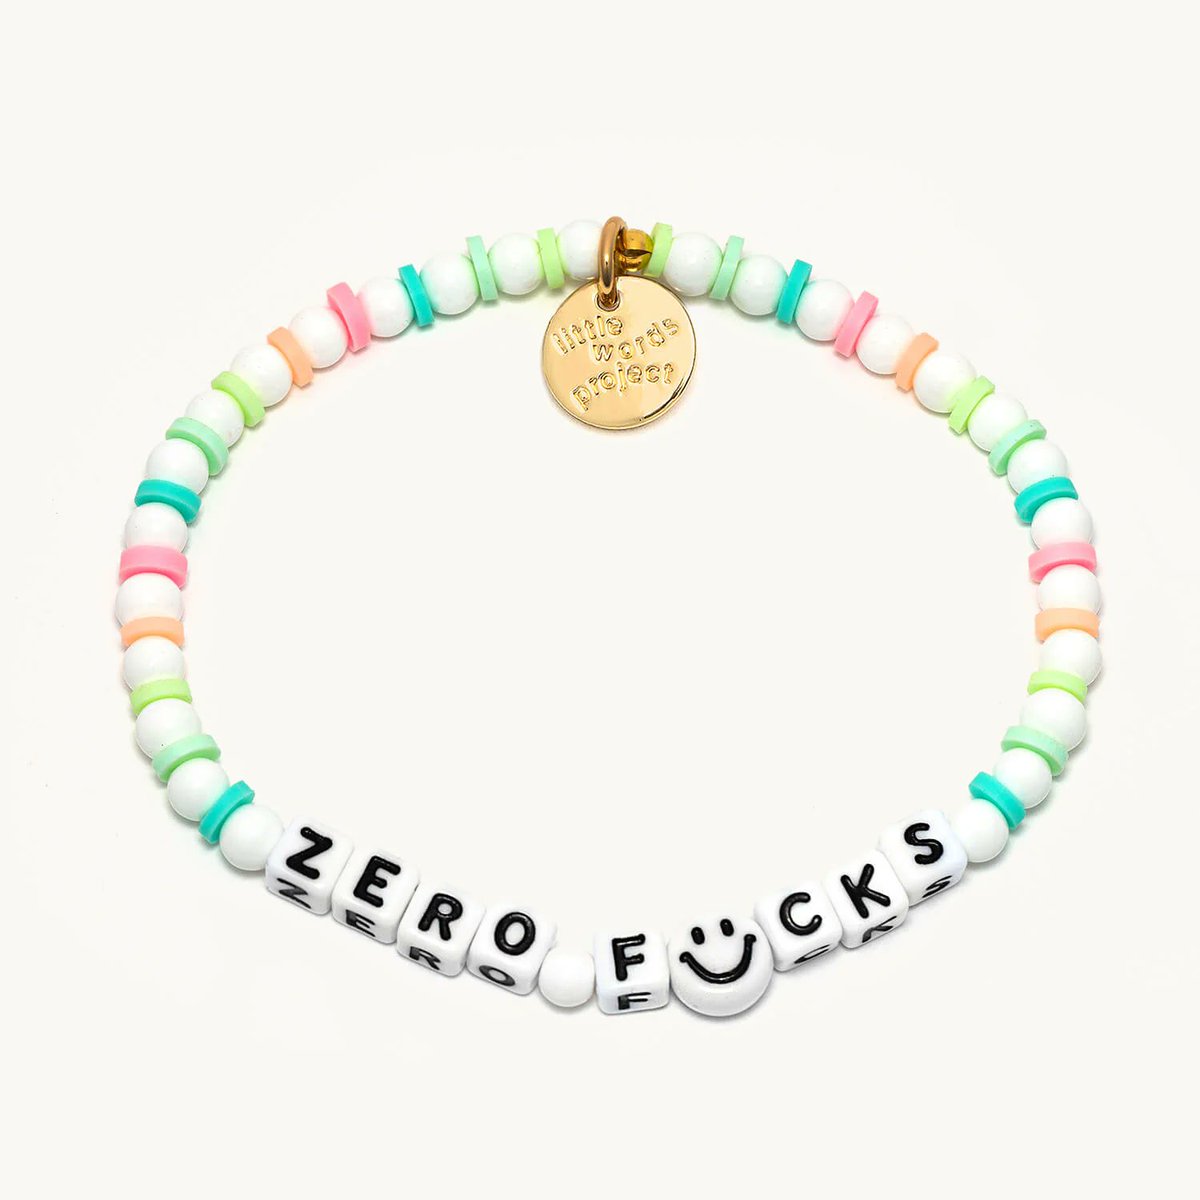 I love my 'Little Words Project' bracelets. They keep me mindful. <3
sldr.page.link/HBZm
Code: BAVERYMARY to save 15% off.
#LittleWordsProject #teens #womensgifts #fashionjewelry #giftsforher #pretty #cute #kawaii #birthdaygifts #christmasgifts #everydaygifts #inspirational